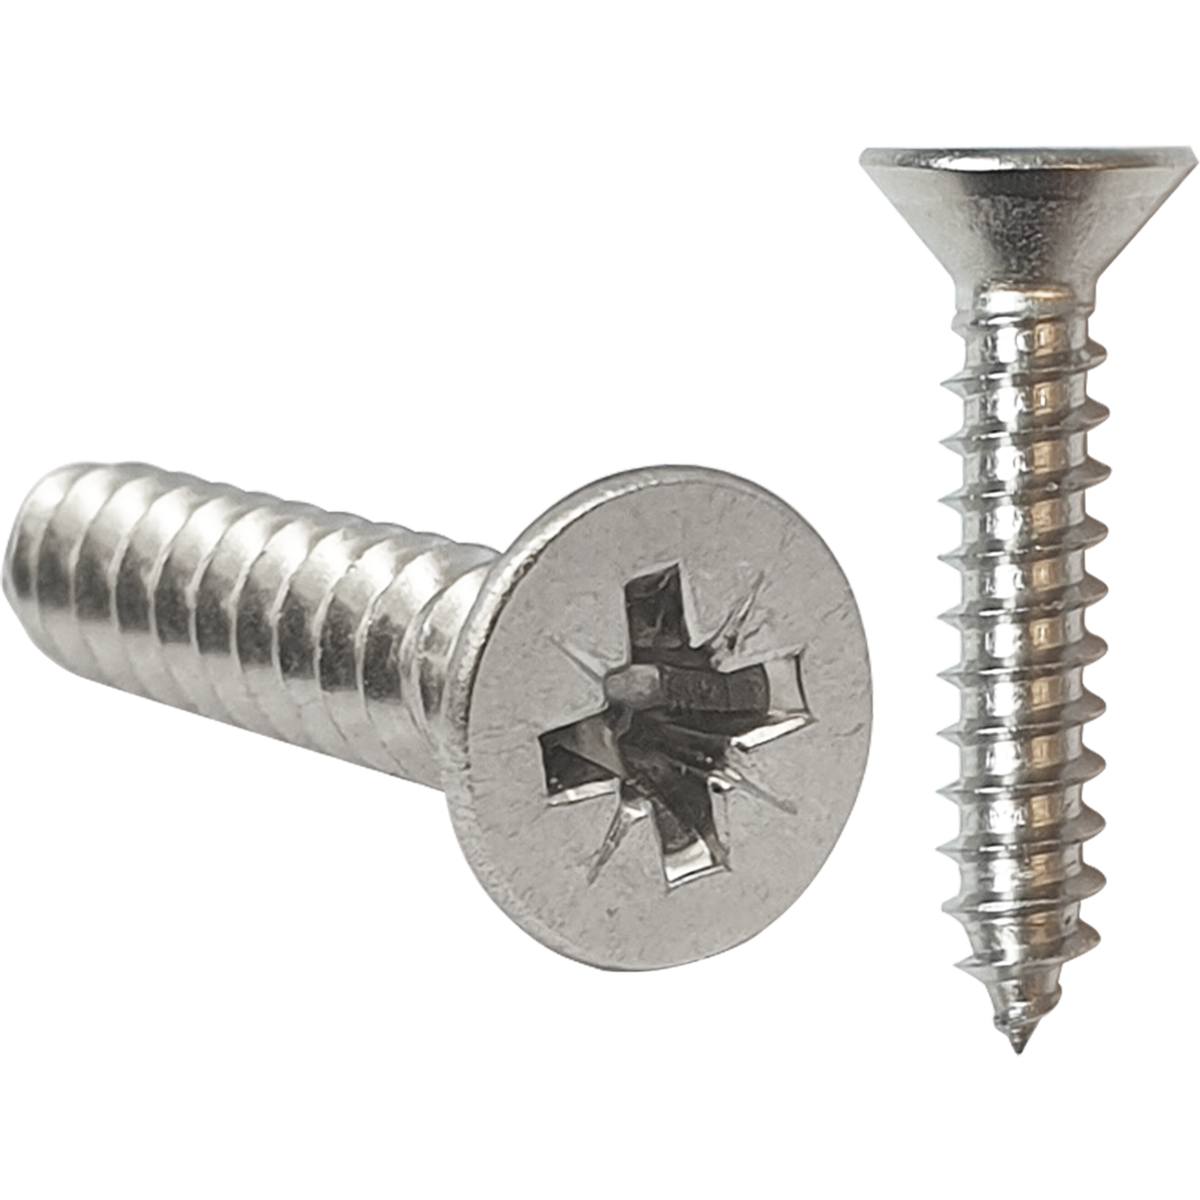 A2 stainless steel, corrosion resistant, countersunk self tapping screws, also known as self tappers, with a Pozi recess.